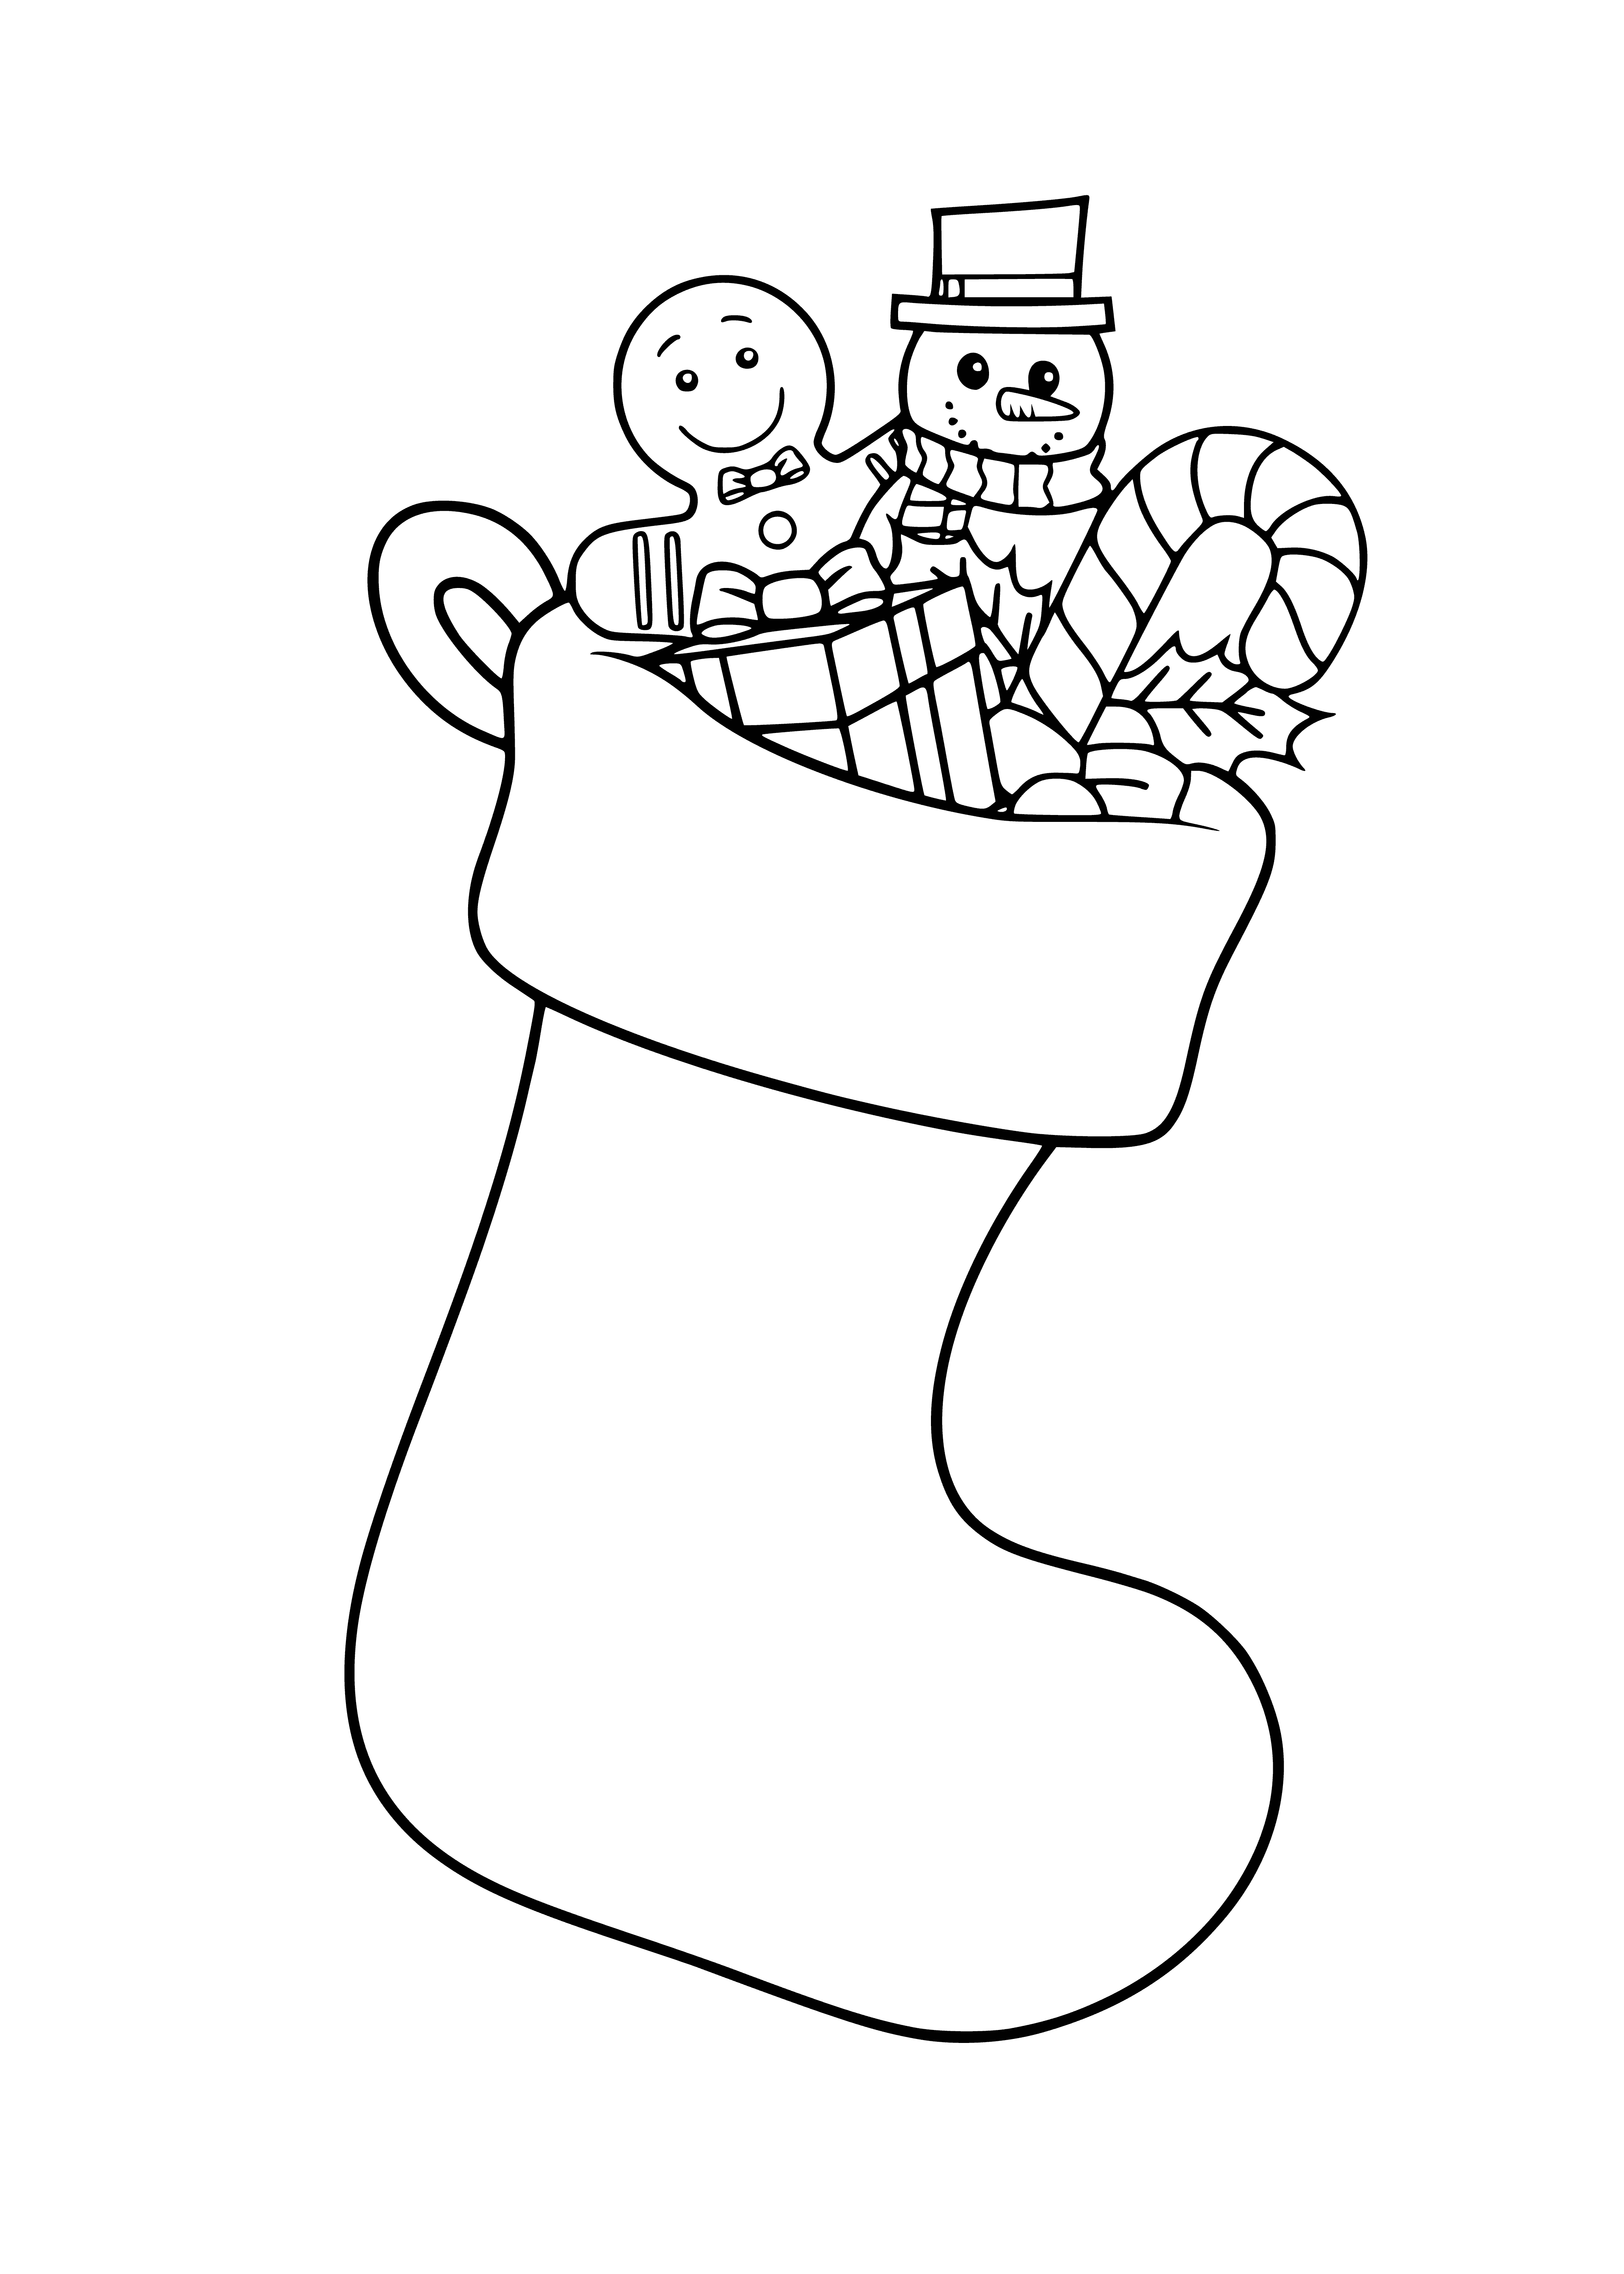 coloring page: Red & white Christmas-themed socks featuring Santa, reindeer & trees - perfect for the holiday season!